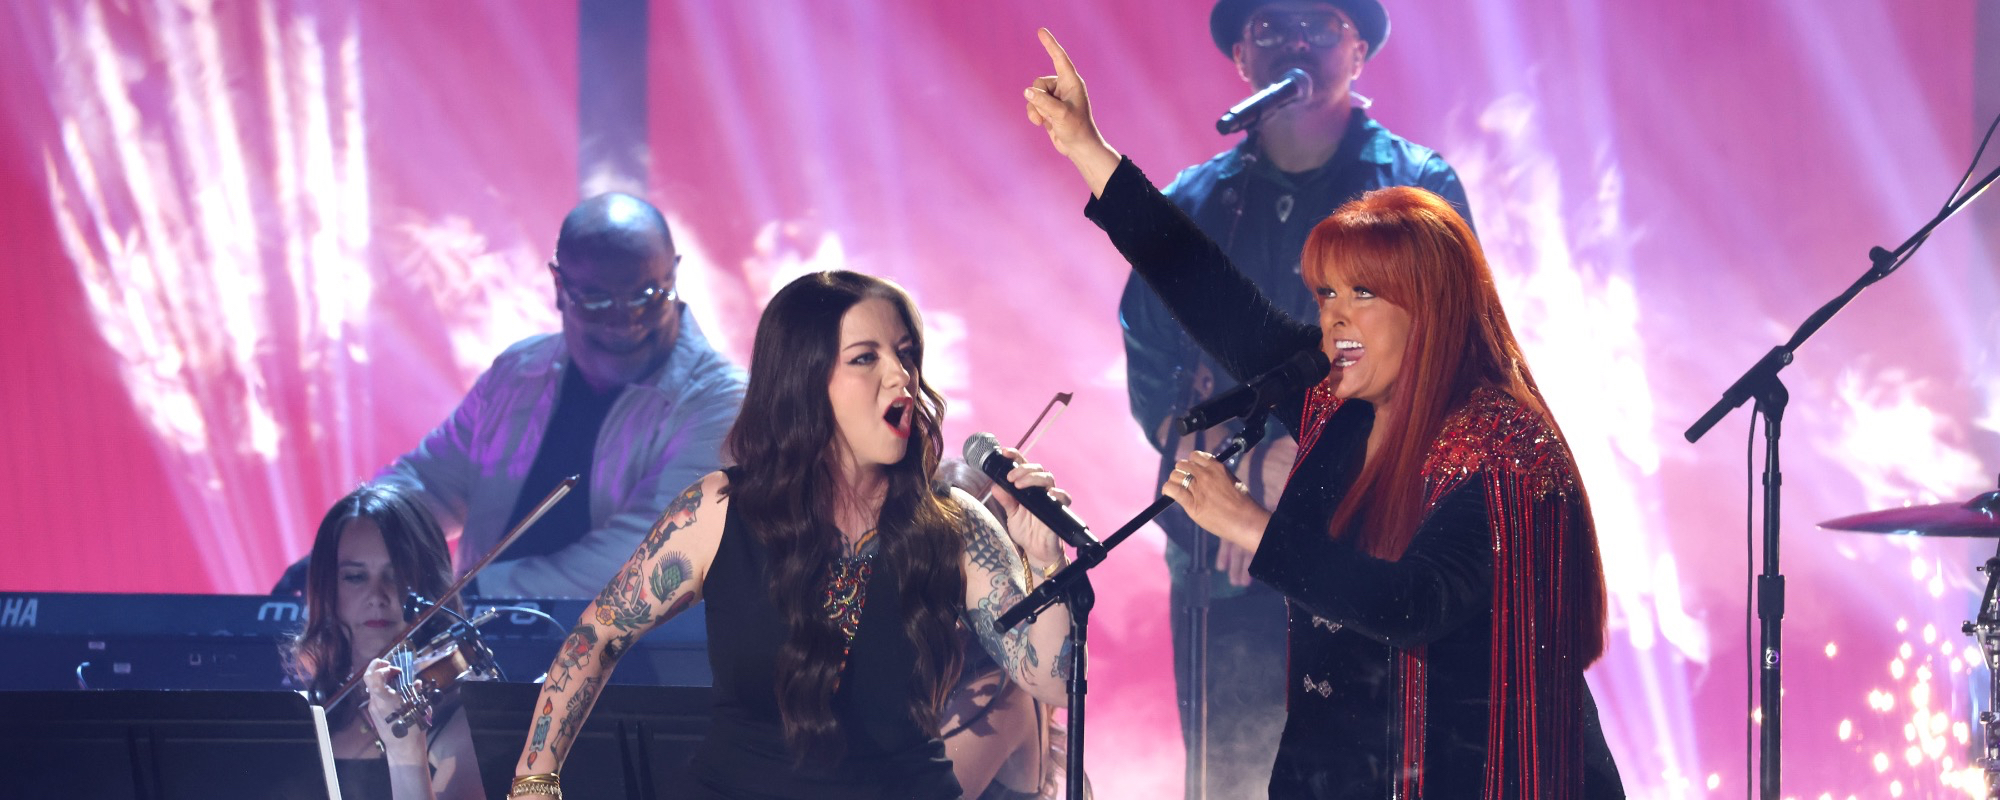 Wynonna Judd, Ashley McBryde Cover Foreigner’s “I Want to Know What Love Is” at CMT Music Awards